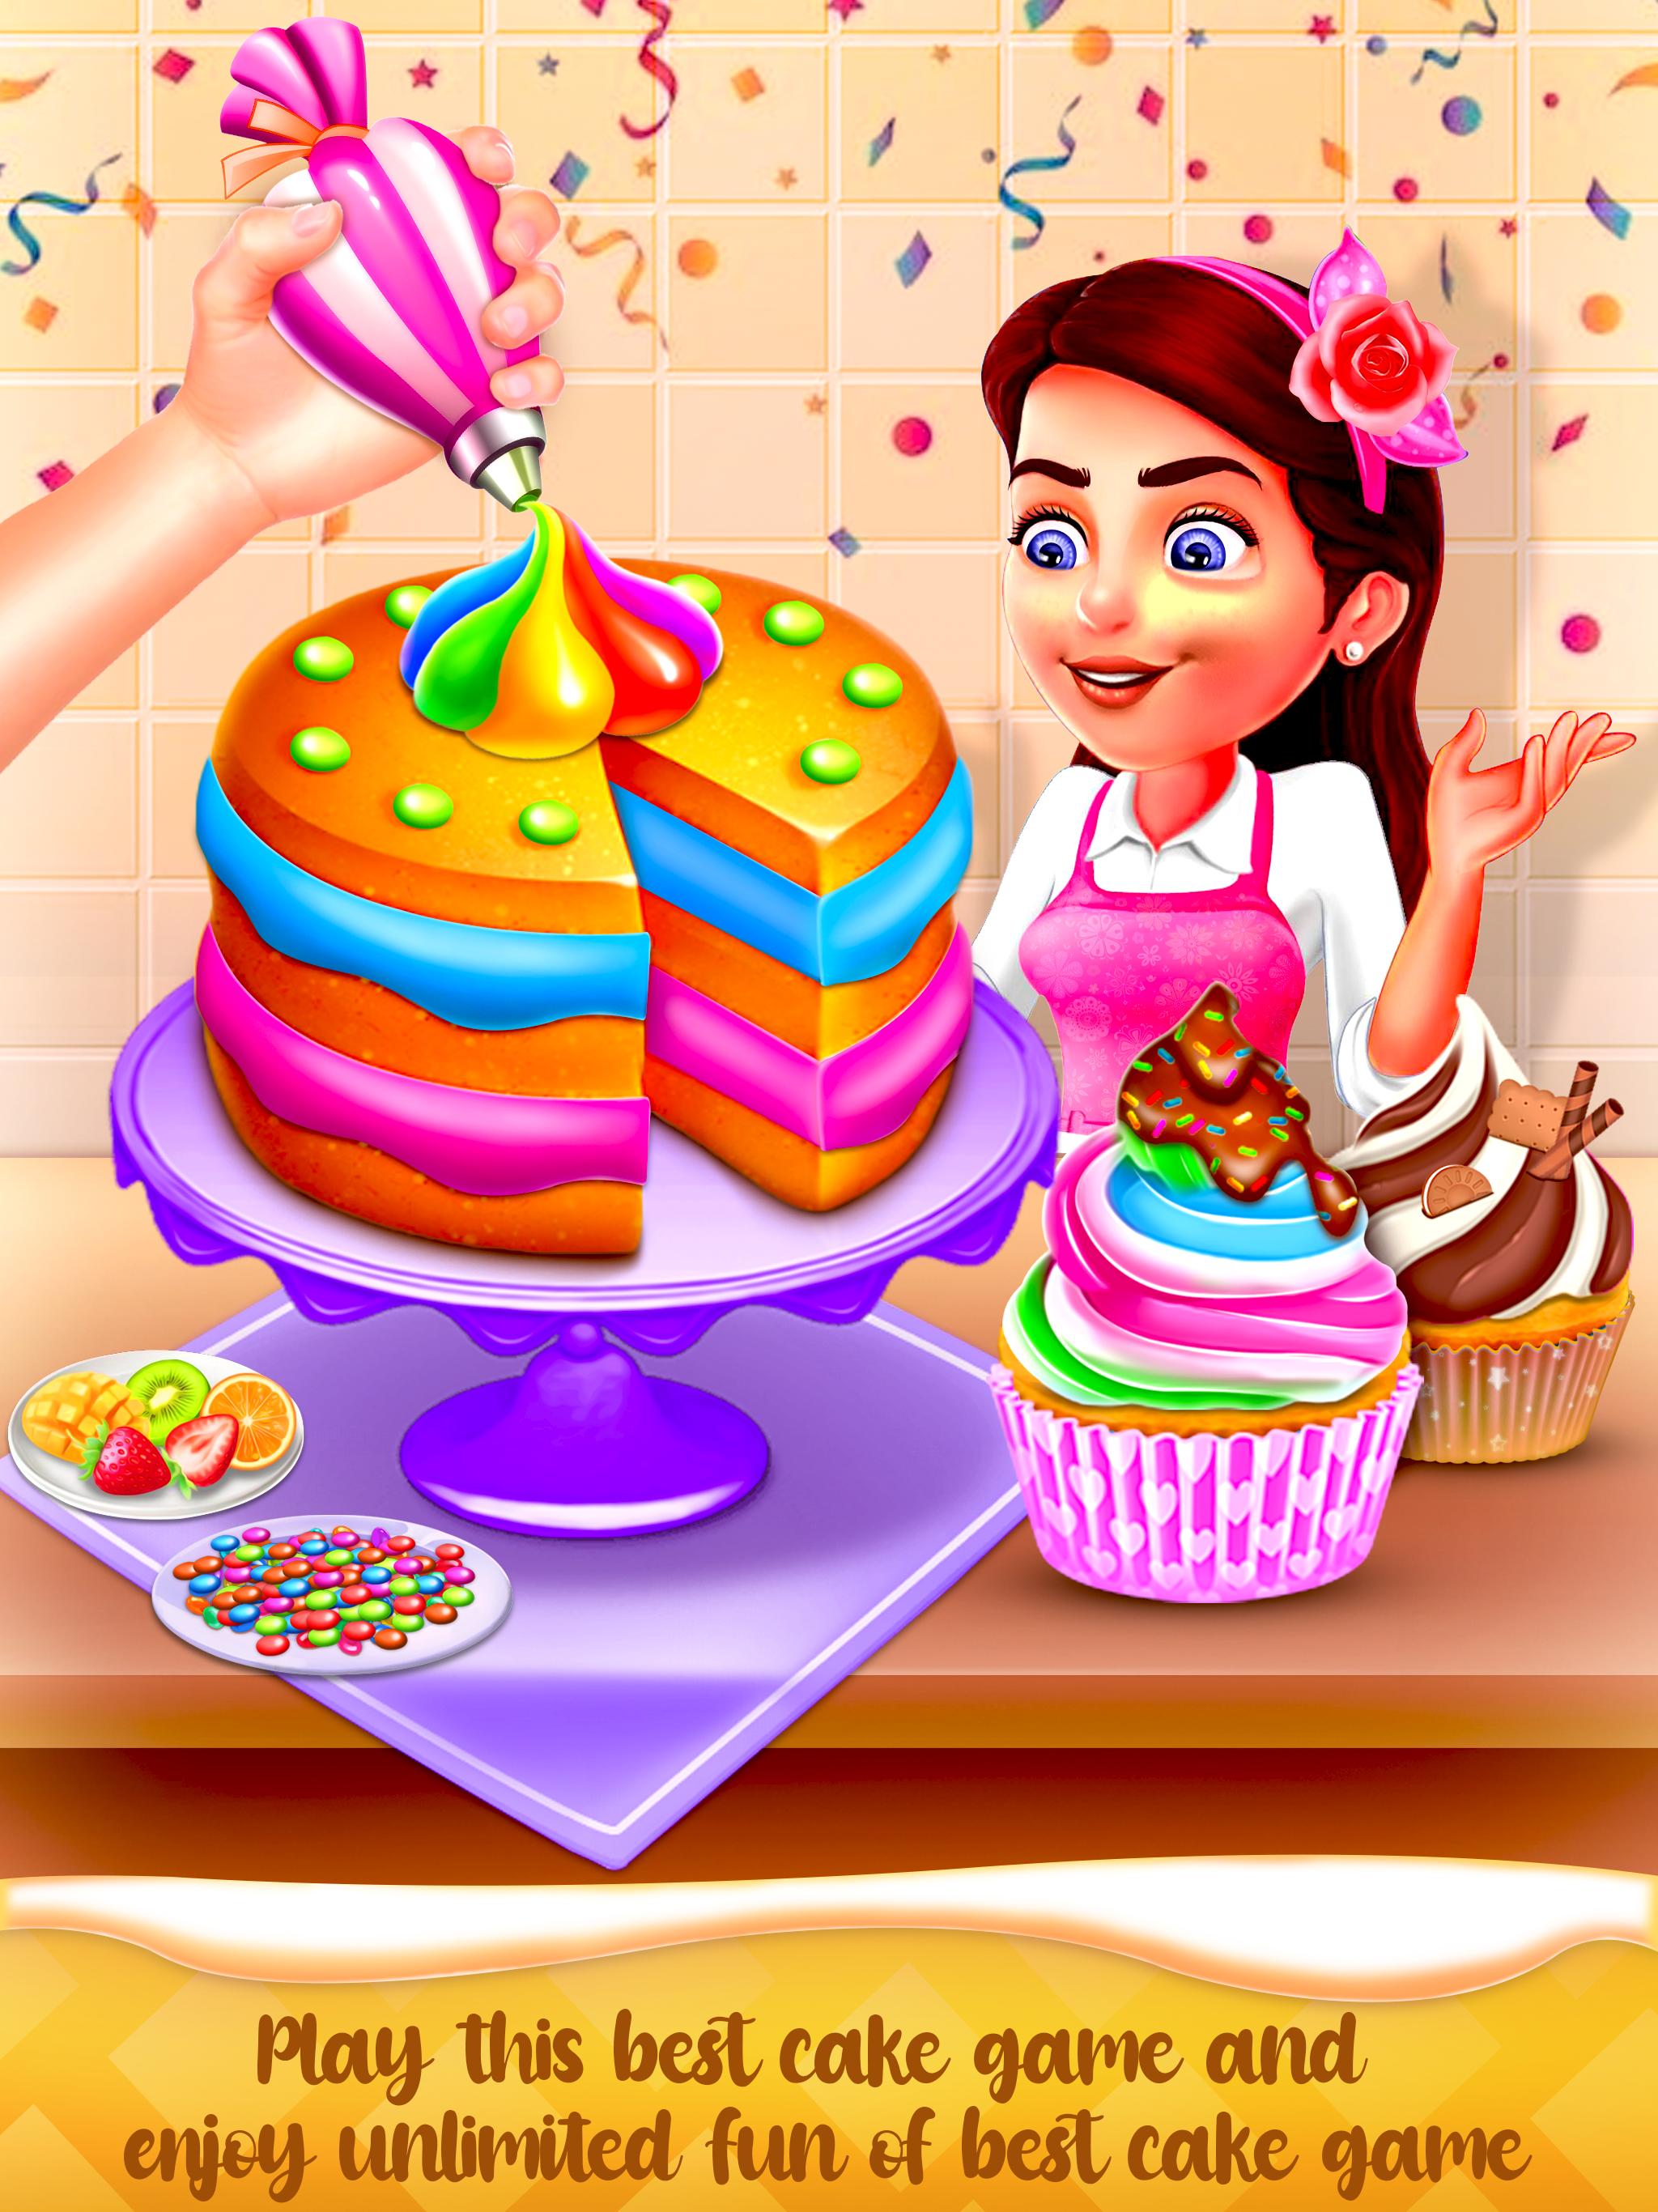 Watch & Learn with Sofia Cooking Princess Cake Game Review-Cooking Games  Tutorials - YouTube